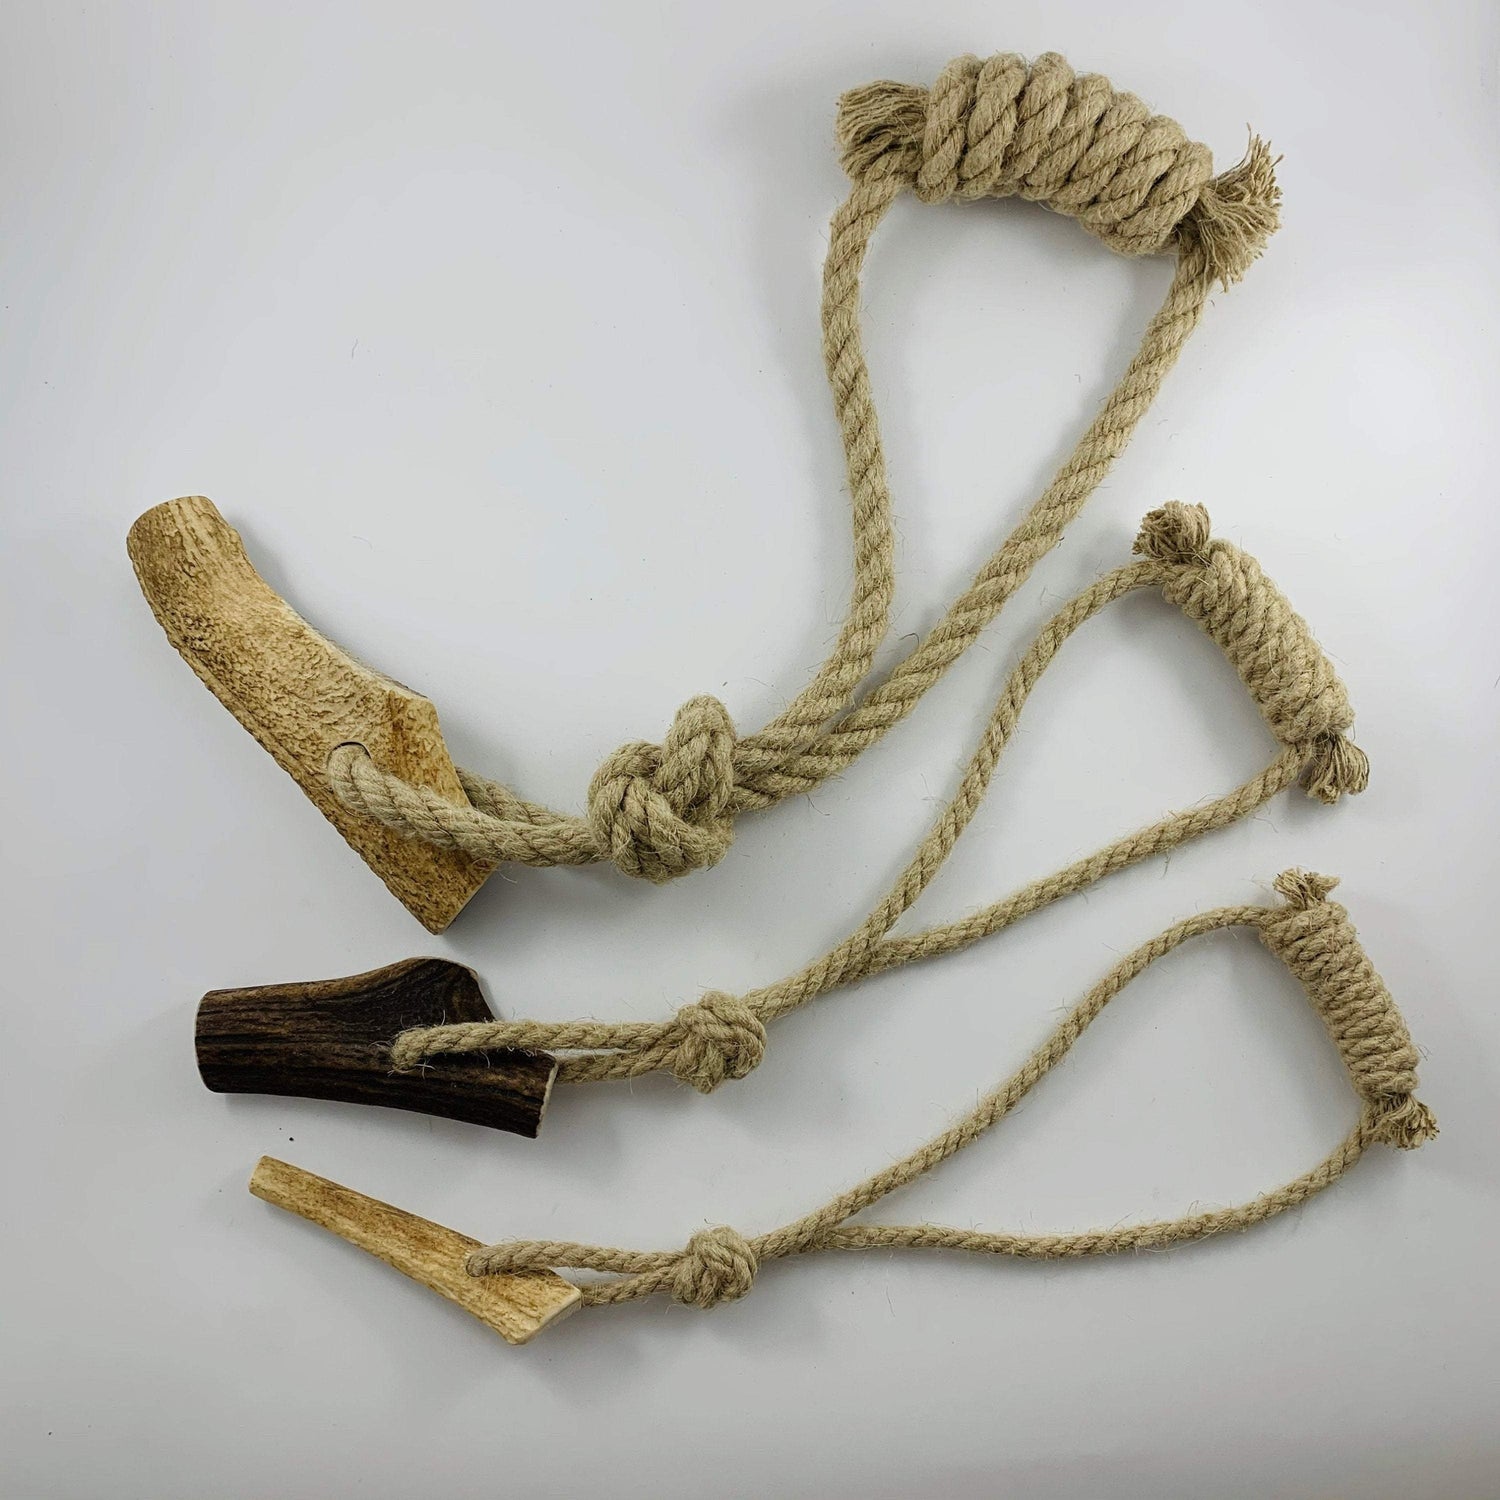 size options for hemp and antler toy for dogs